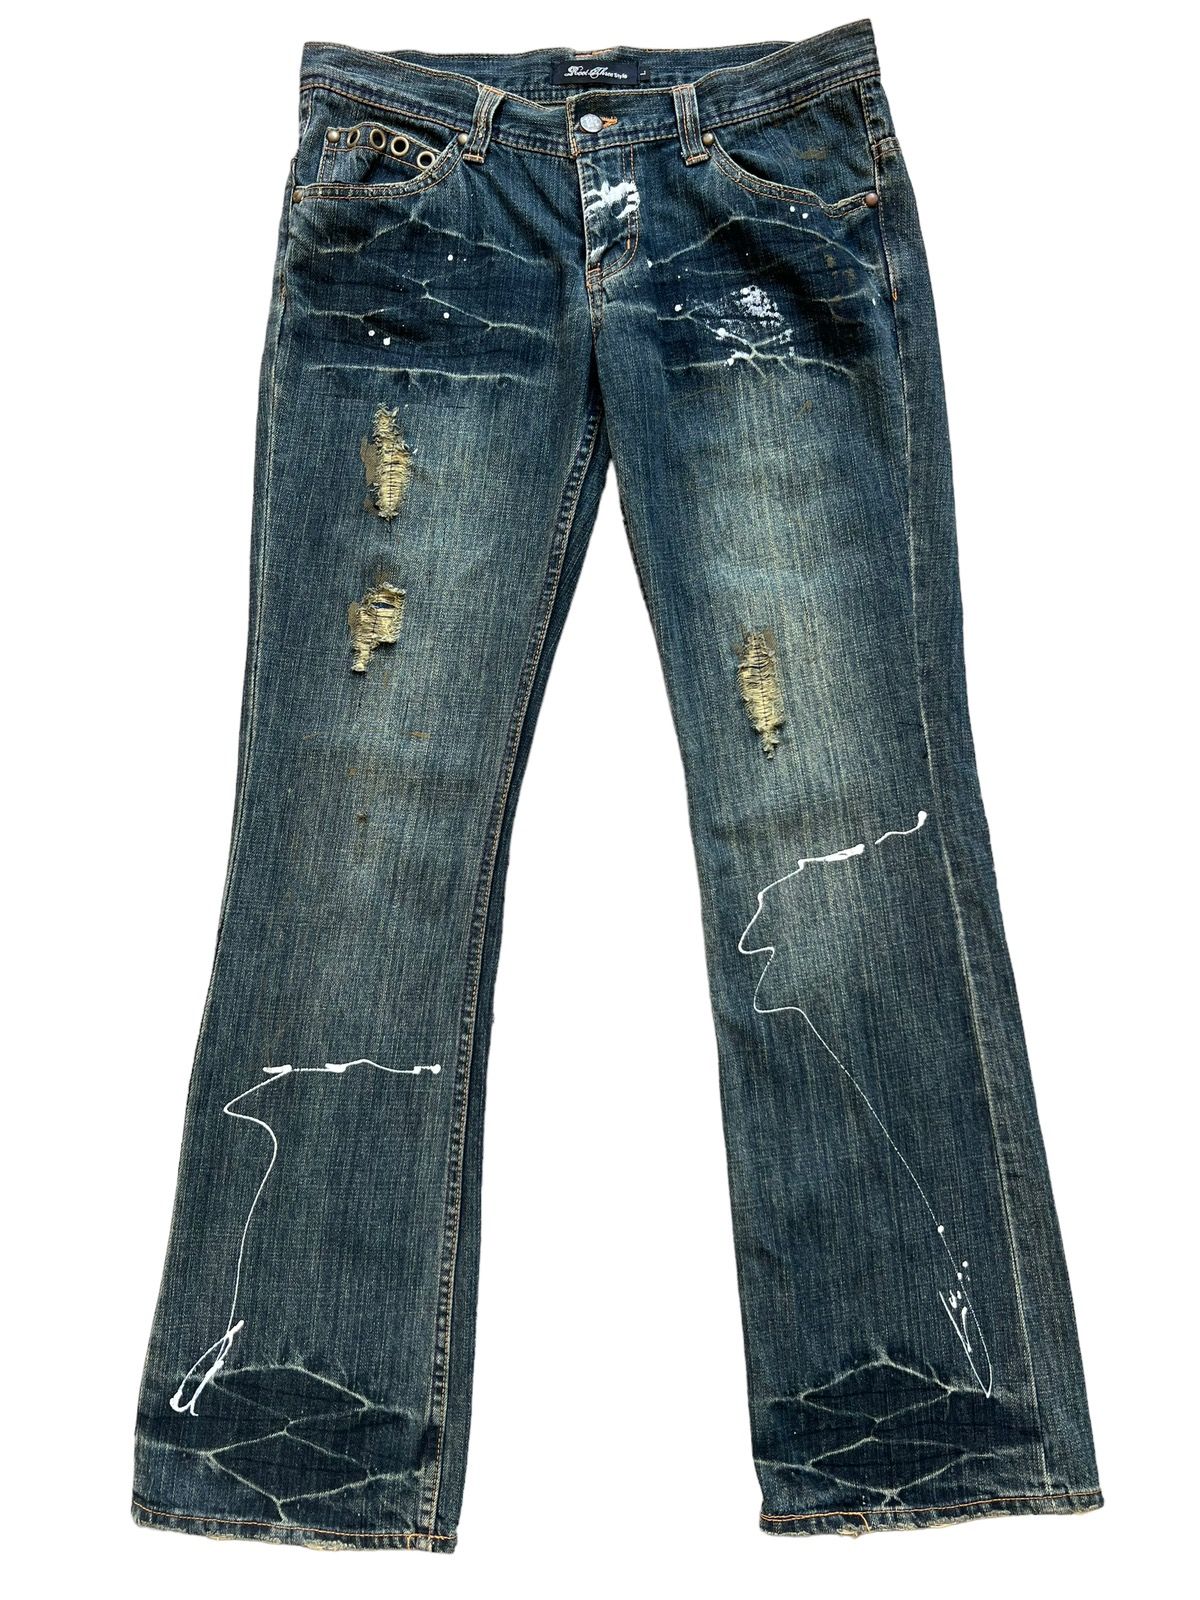 Hype - Roots Japan Distressed Riped Rusty Denim Painted Jeans 33x33 - 2